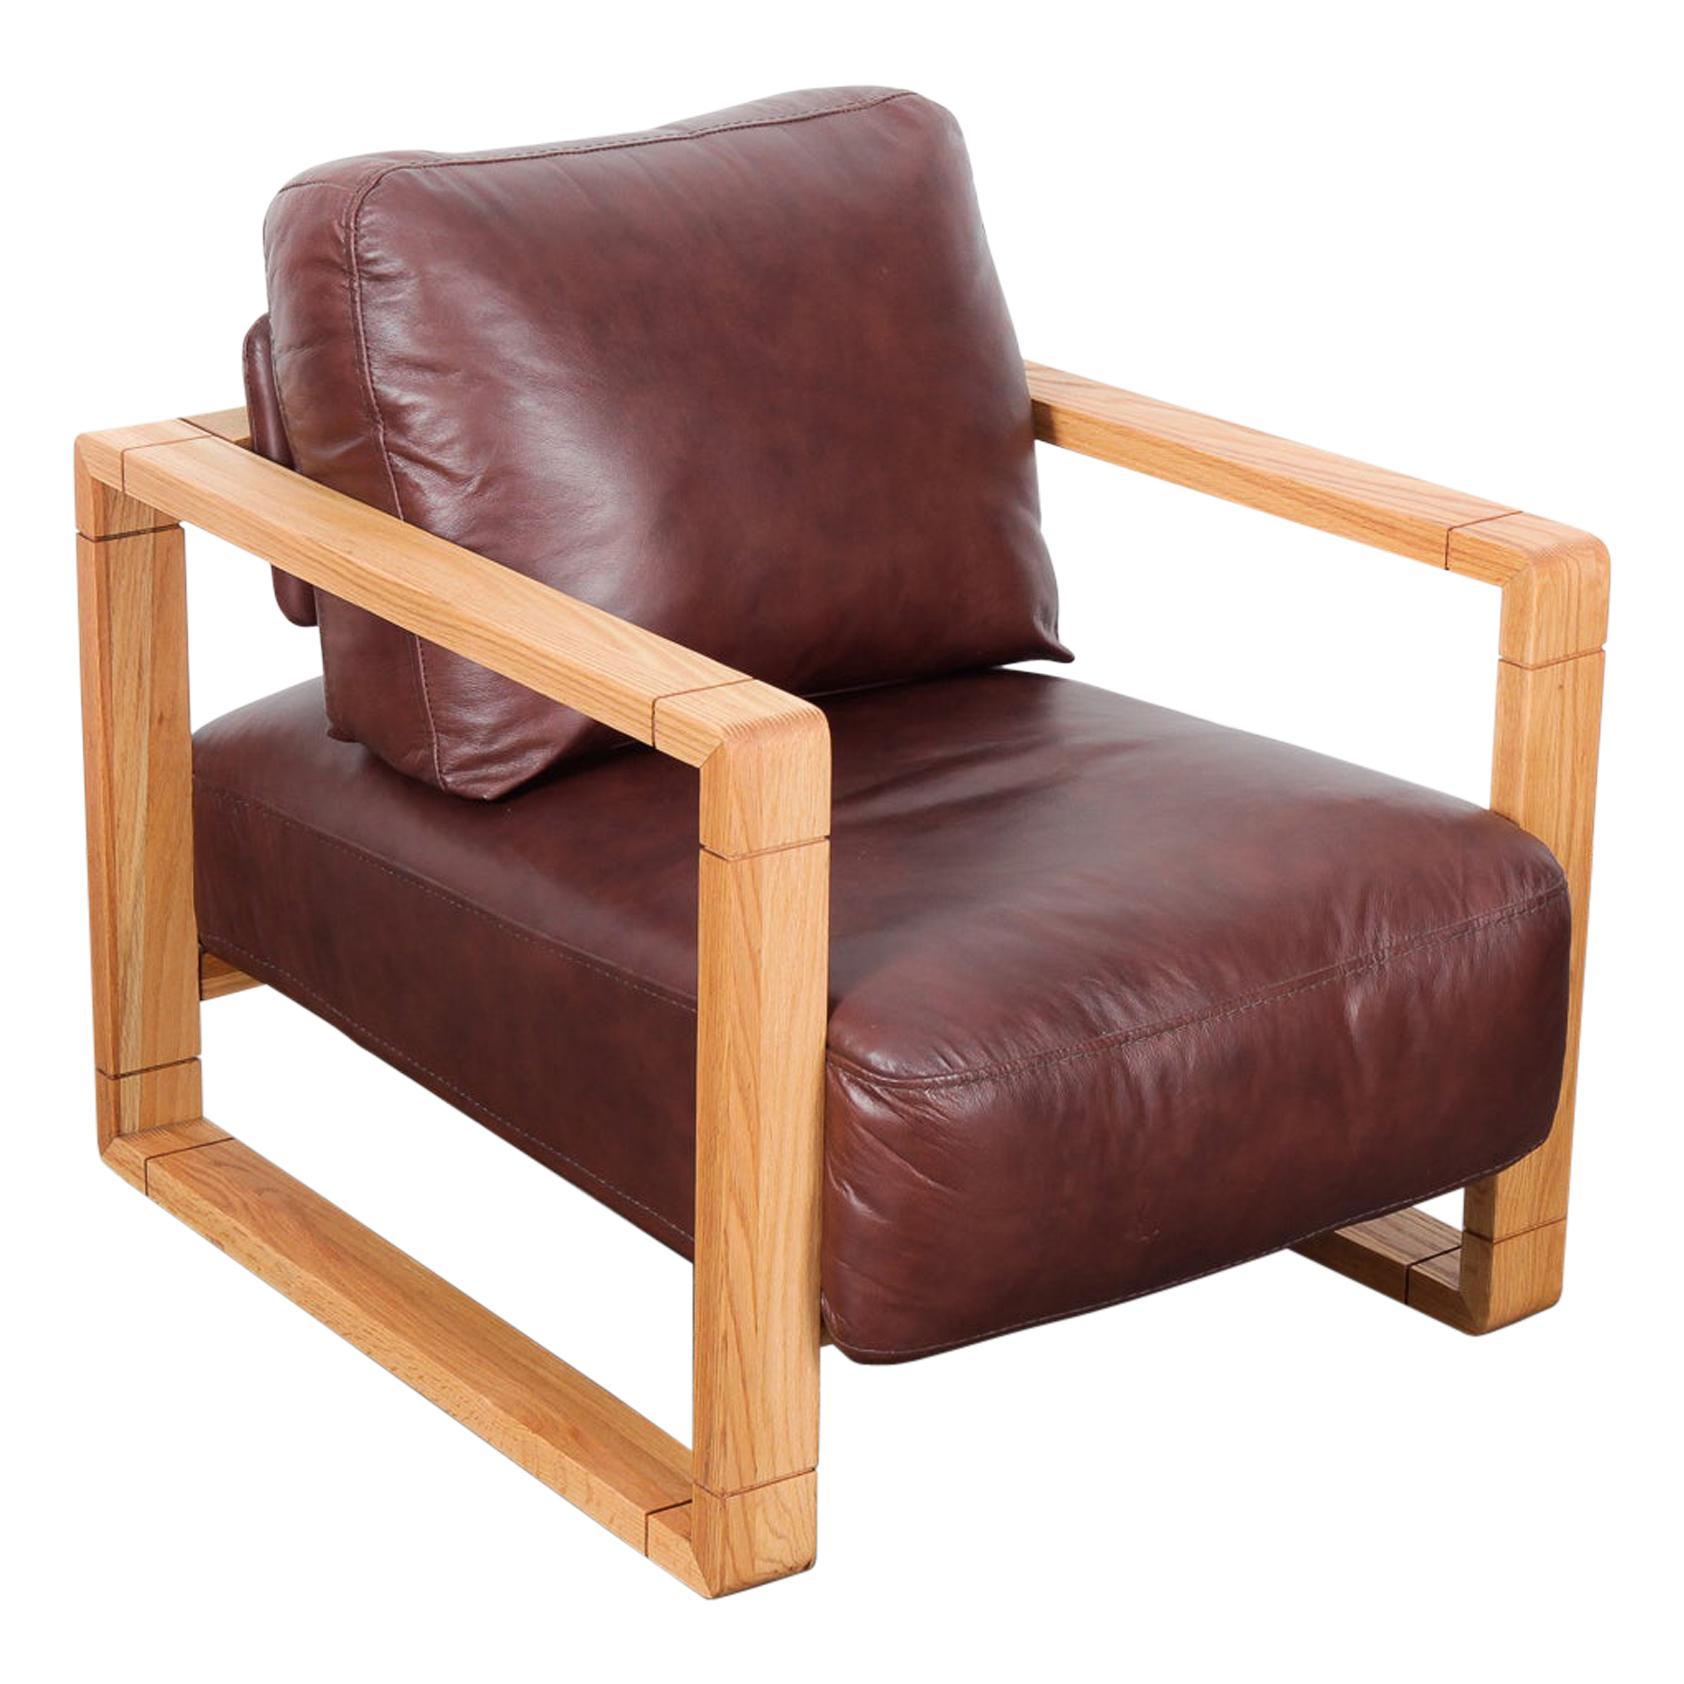 Swedish Solid Oak Framed Lounge Chair with Original Brown Leather